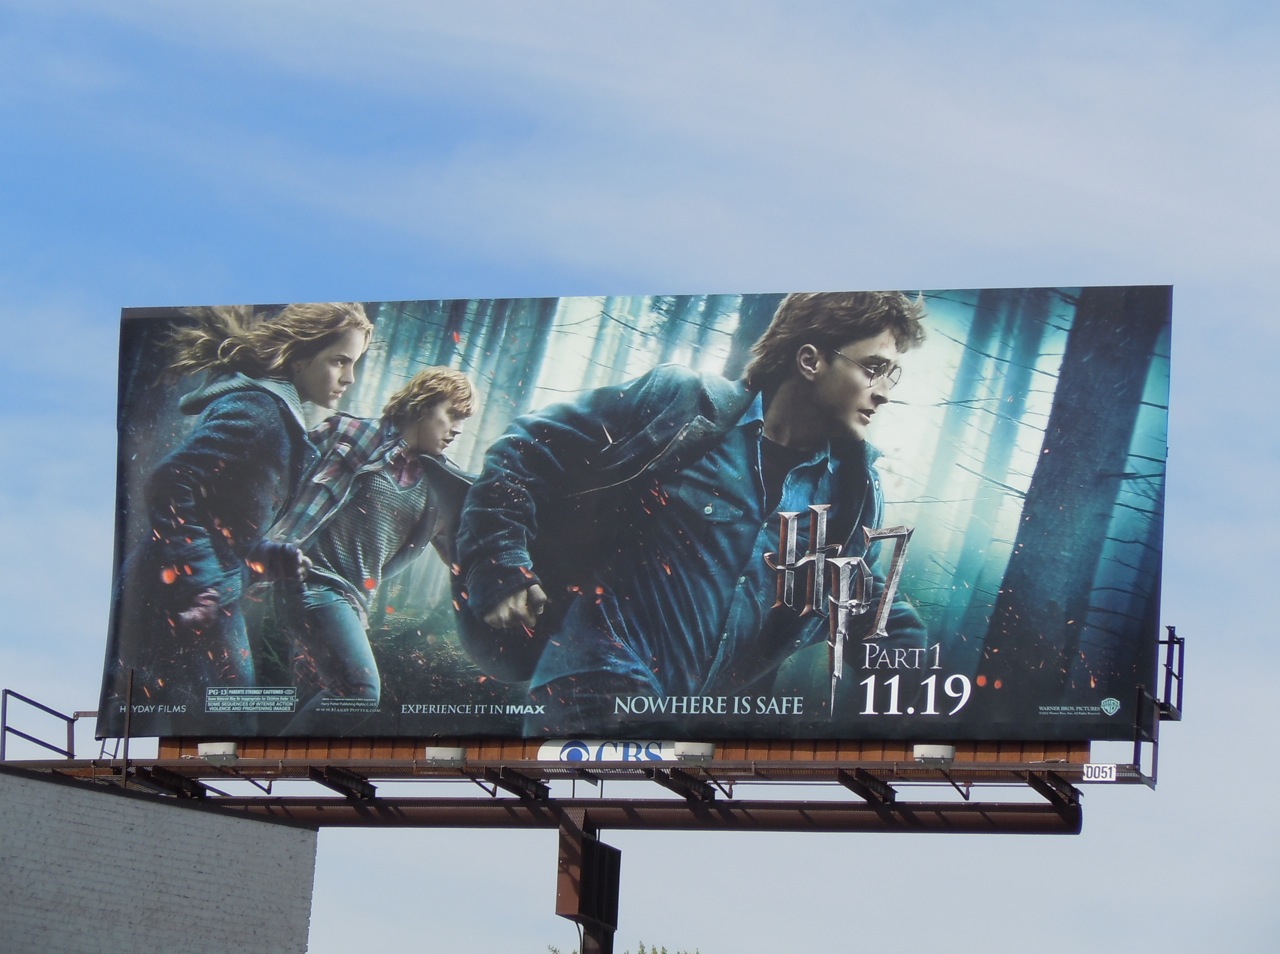 Daily Billboard: Harry Potter 7 Nowhere Is Safe movie billboard... Advertising for ...1280 x 954